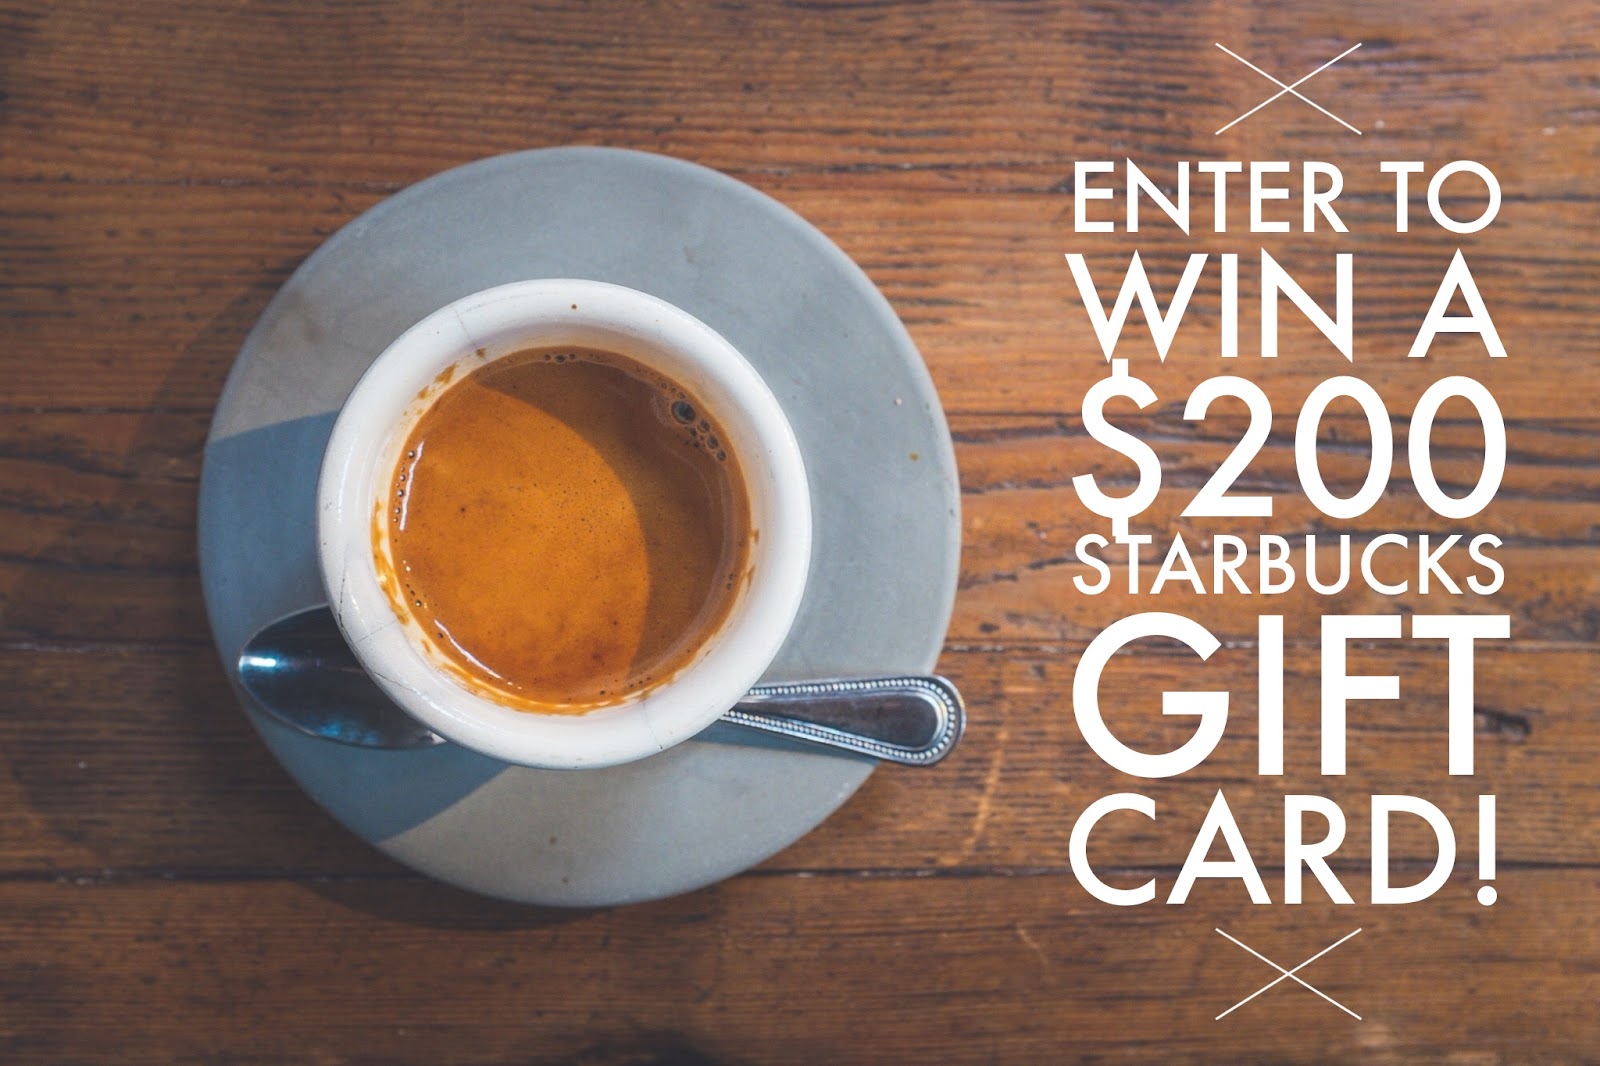 $200 Starbucks Gift Card Giveaway!